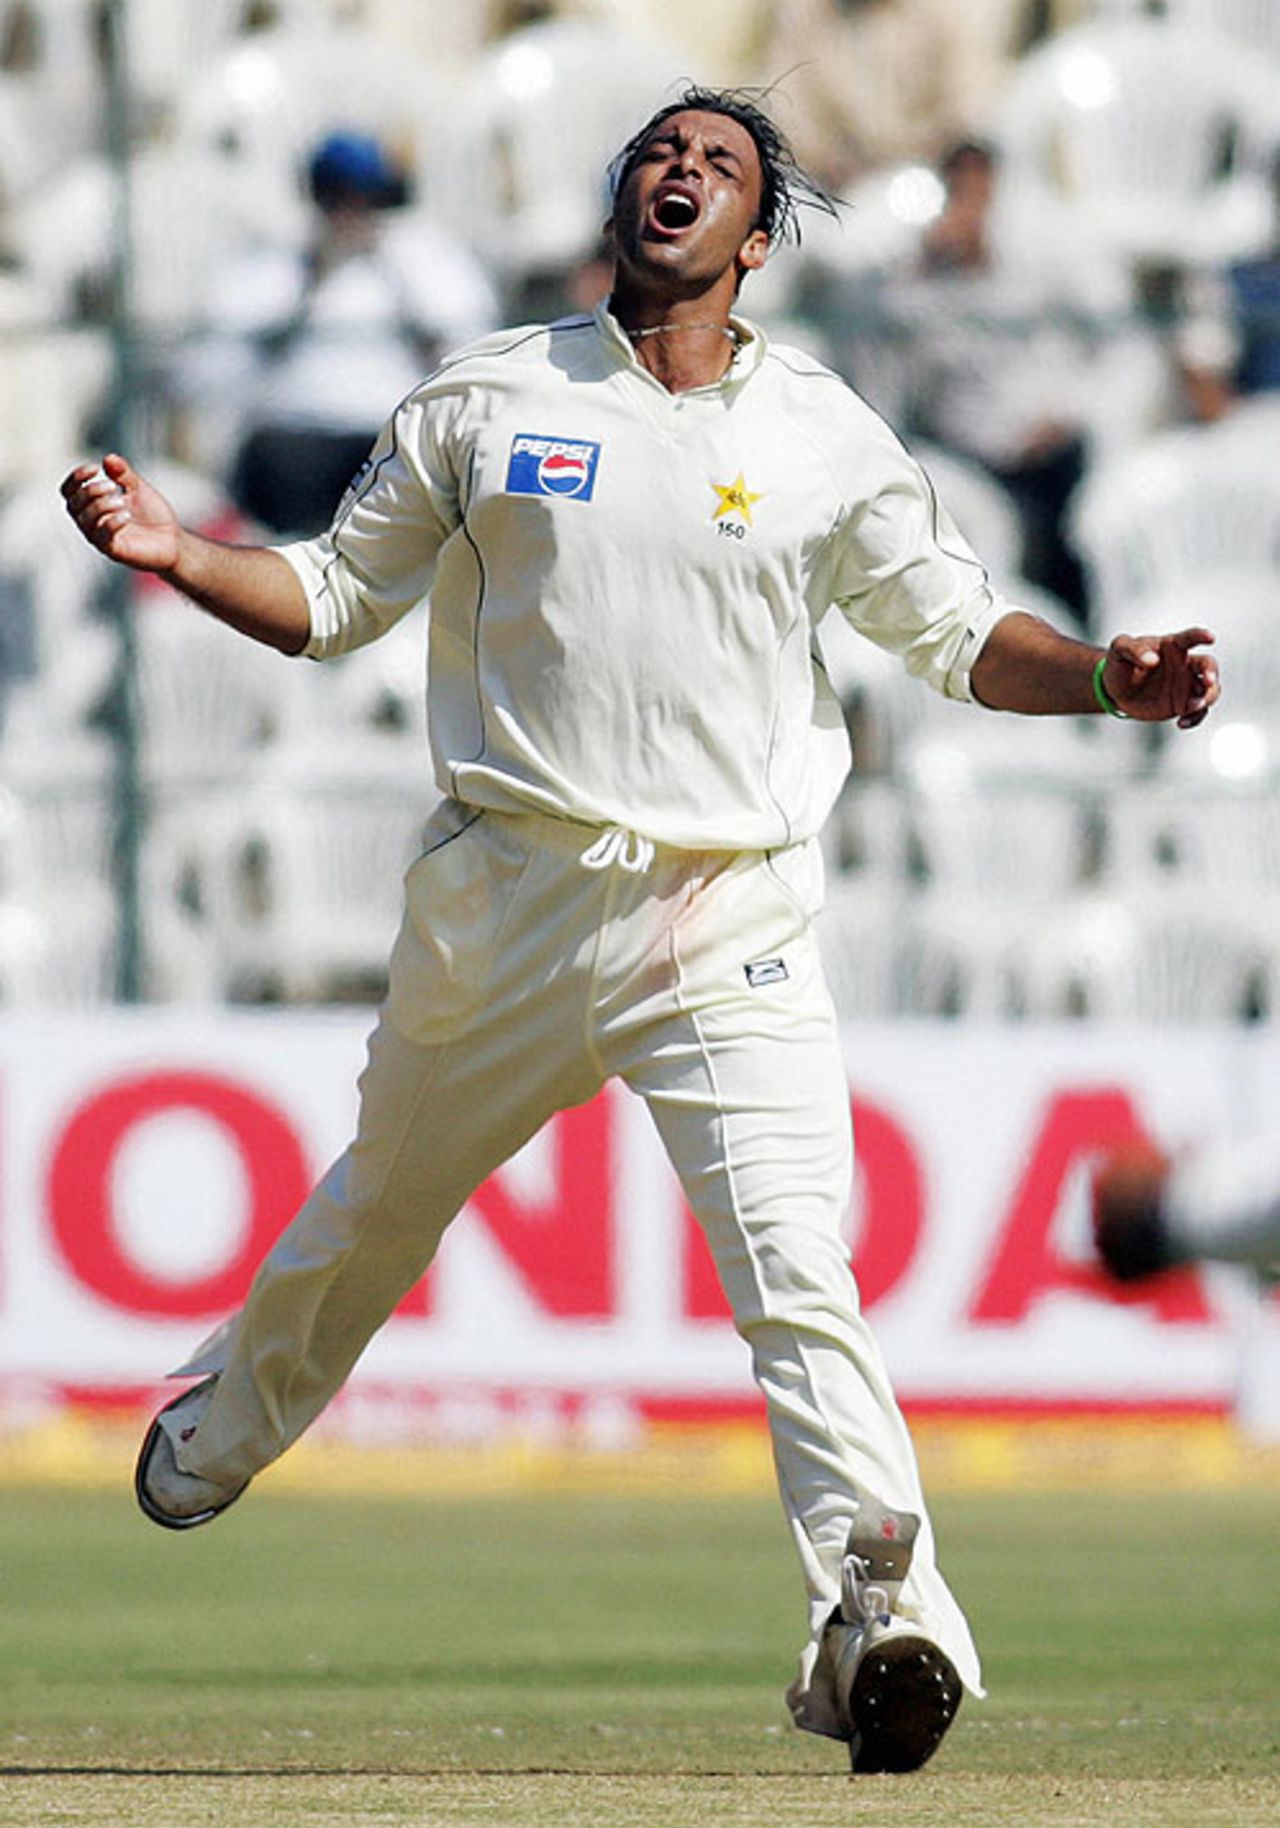 Shoaib Akhtar was luckless on the fifth morning, India v Pakistan, 3rd Test, Bangalore, 5th day, December 12, 2007 

